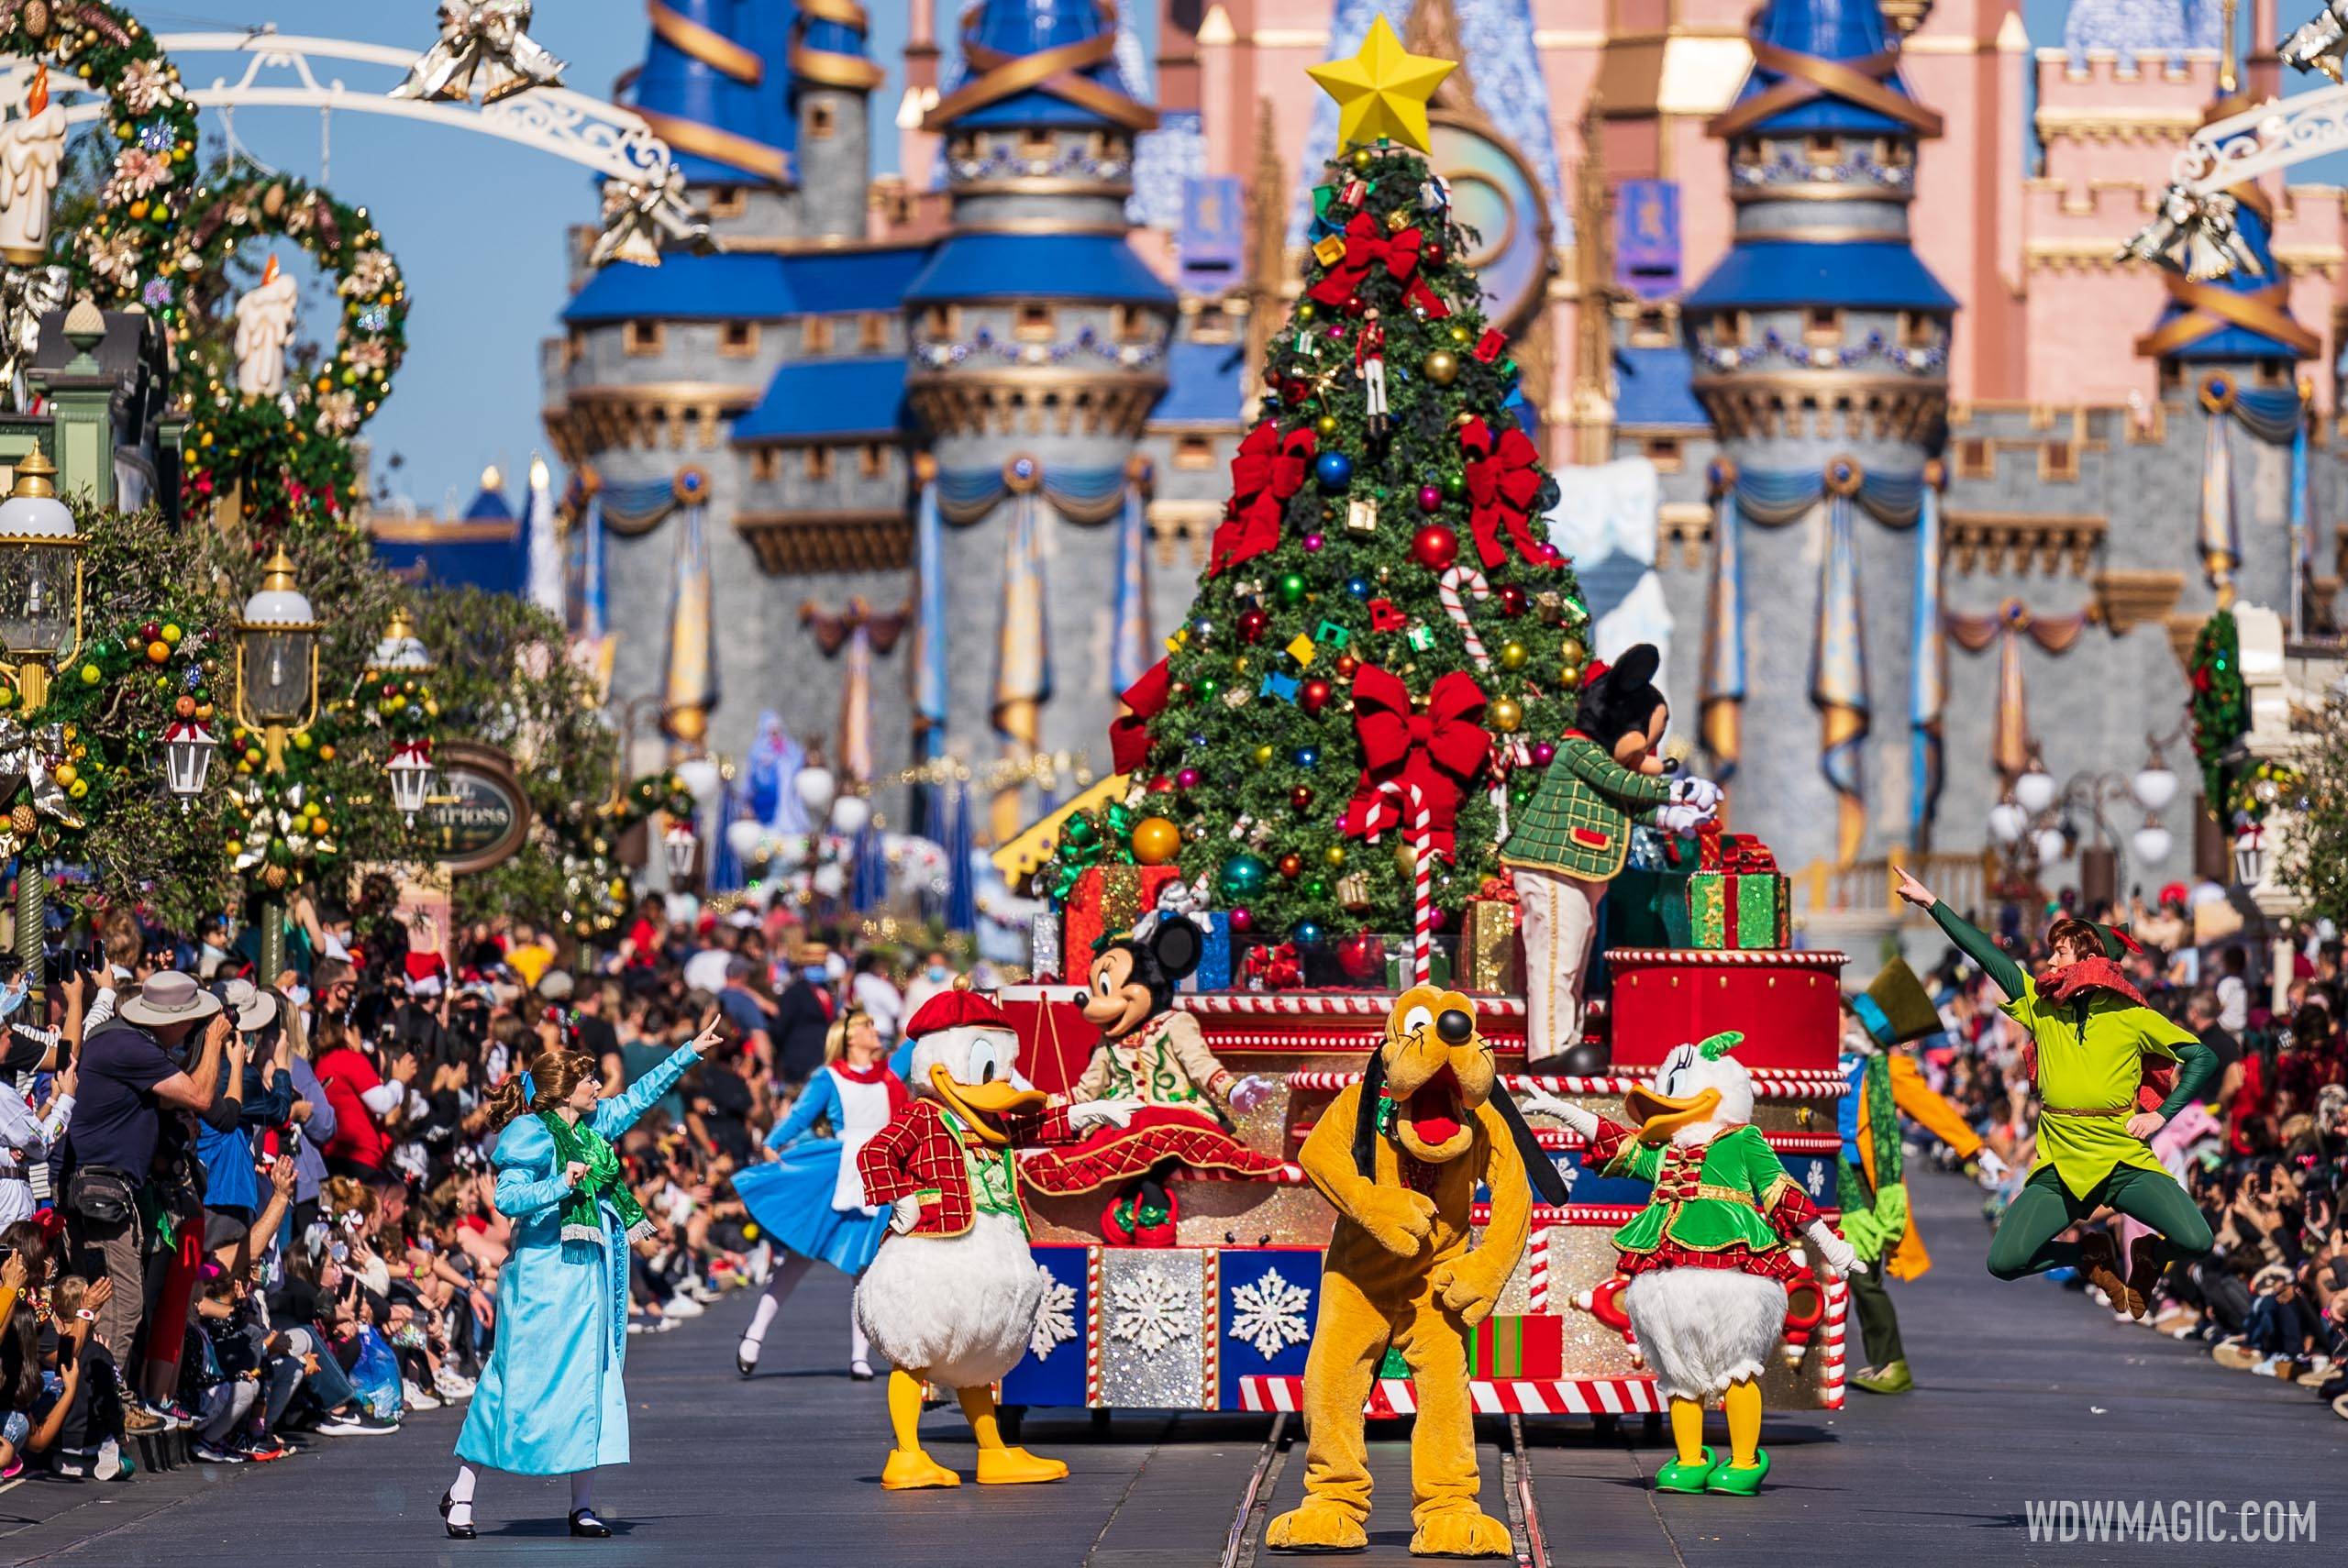 Disney World sees the return of daytime parades with 'Mickey's Once Upon a Christmastime Parade' at Magic Kingdom